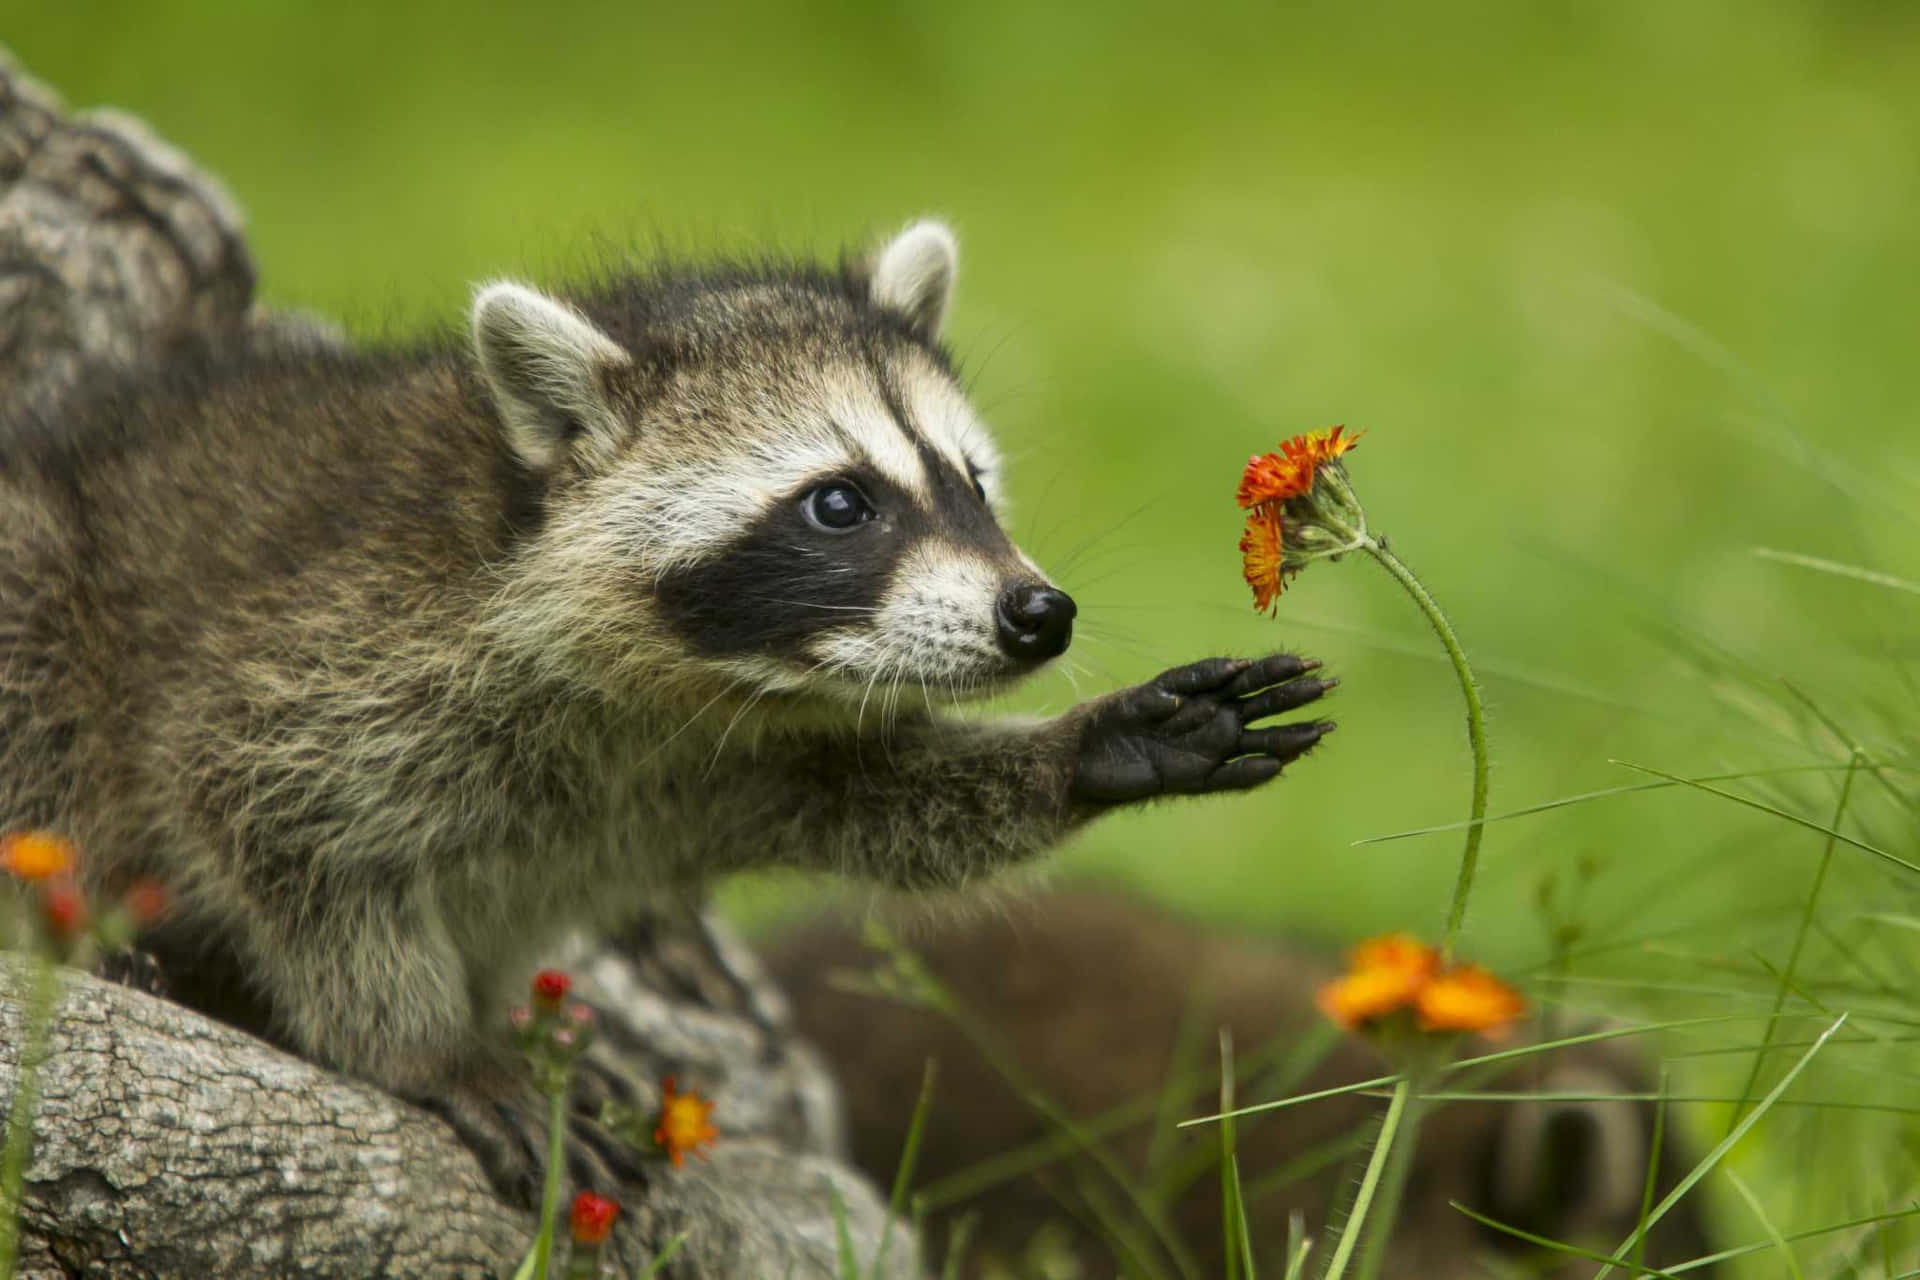 A curious raccoon investigating its surroundings